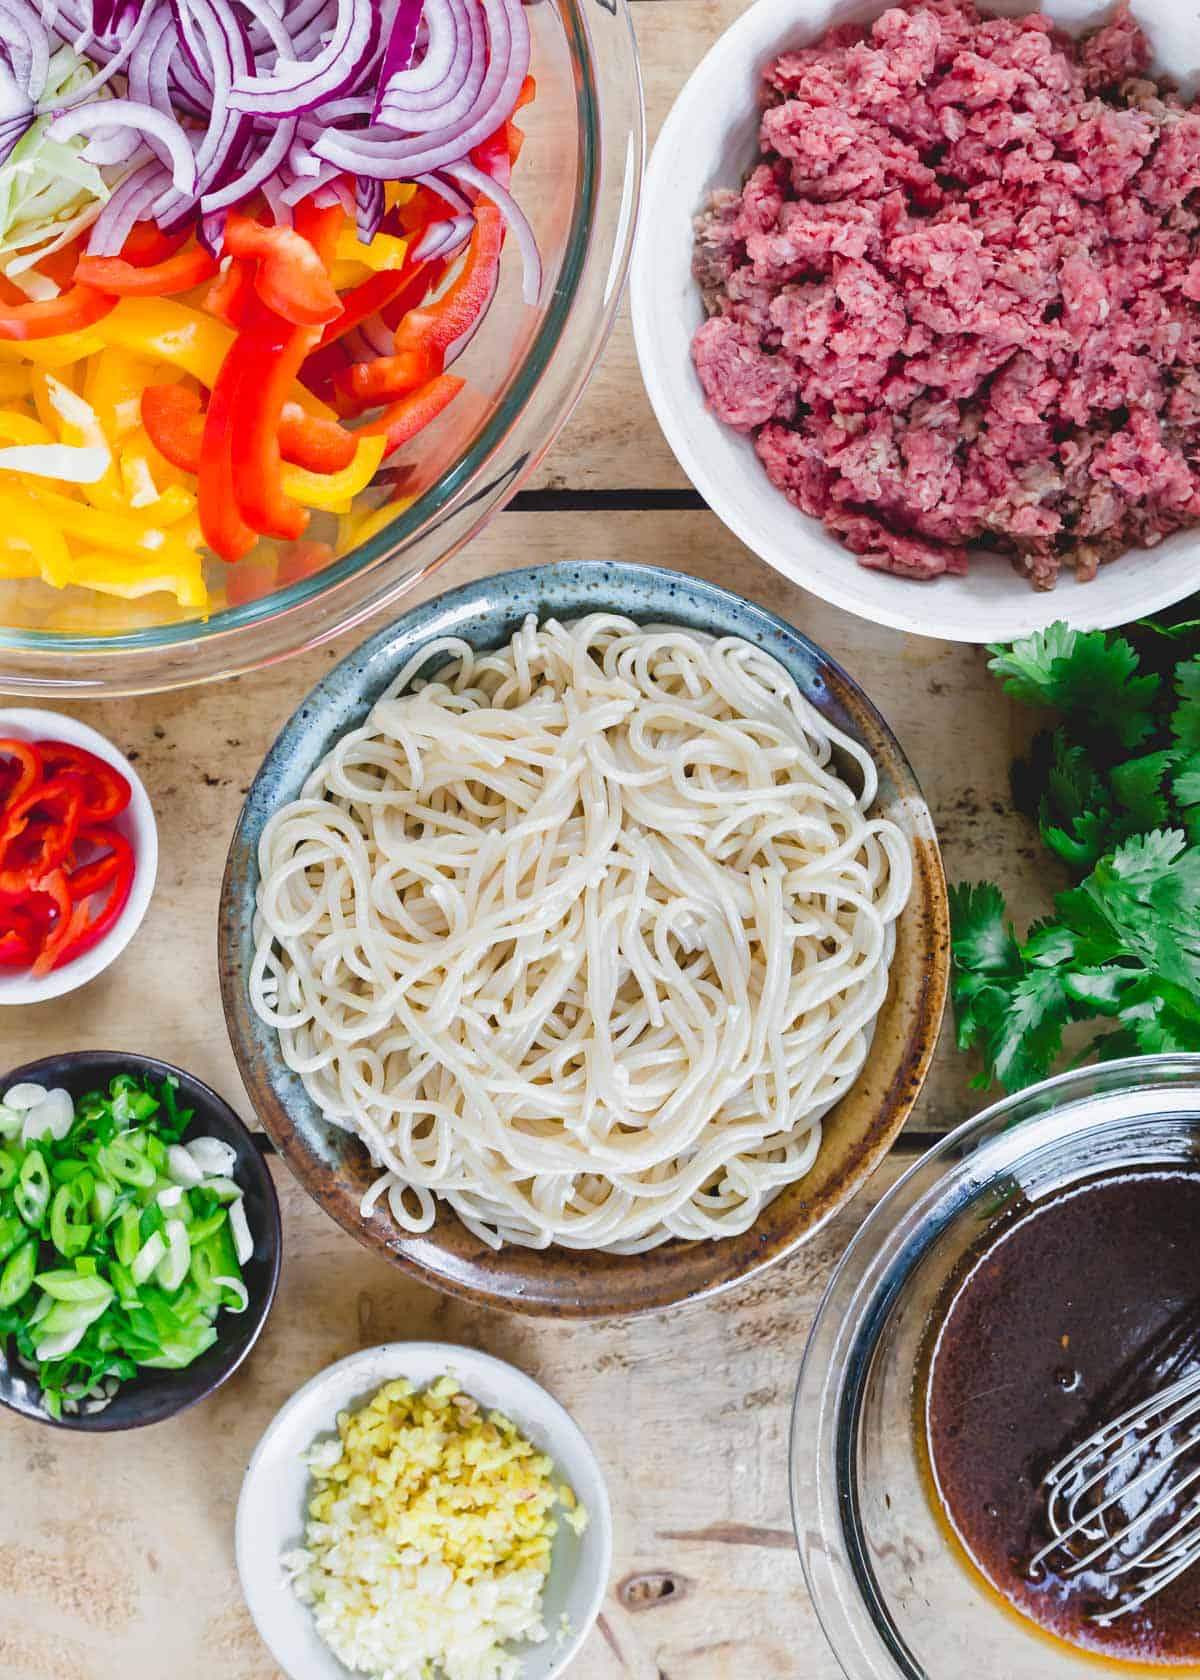 Ingredients to make spicy beef udon noodles in different bowls on a wood table.